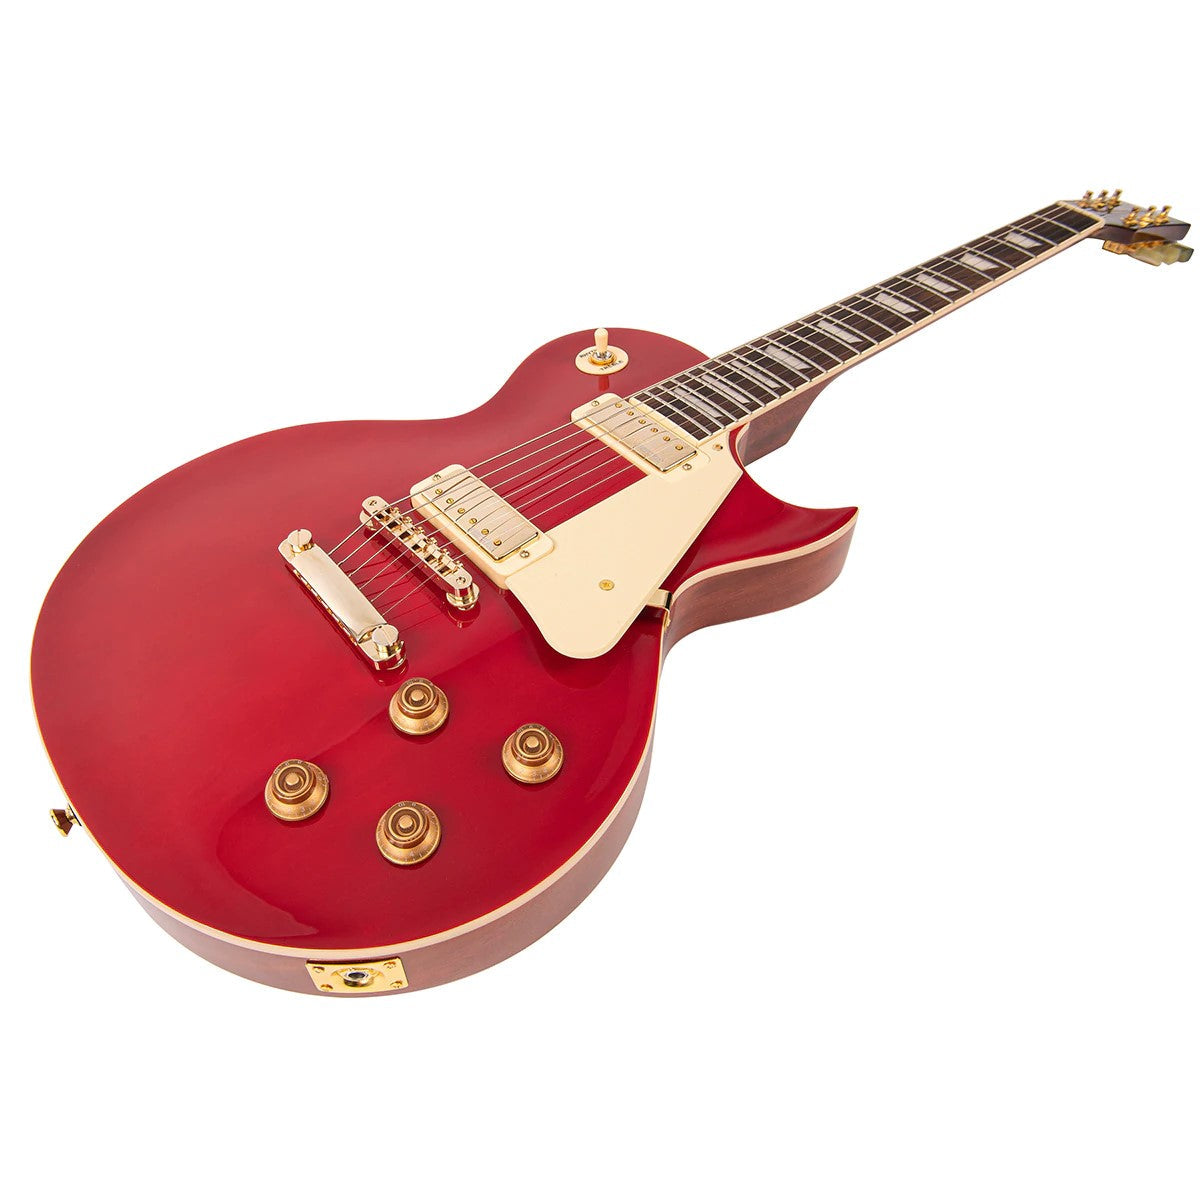 Vintage V100M Mini Humbucker ReIssued Electric Guitar ~ Wine Red, Electric Guitar for sale at Richards Guitars.